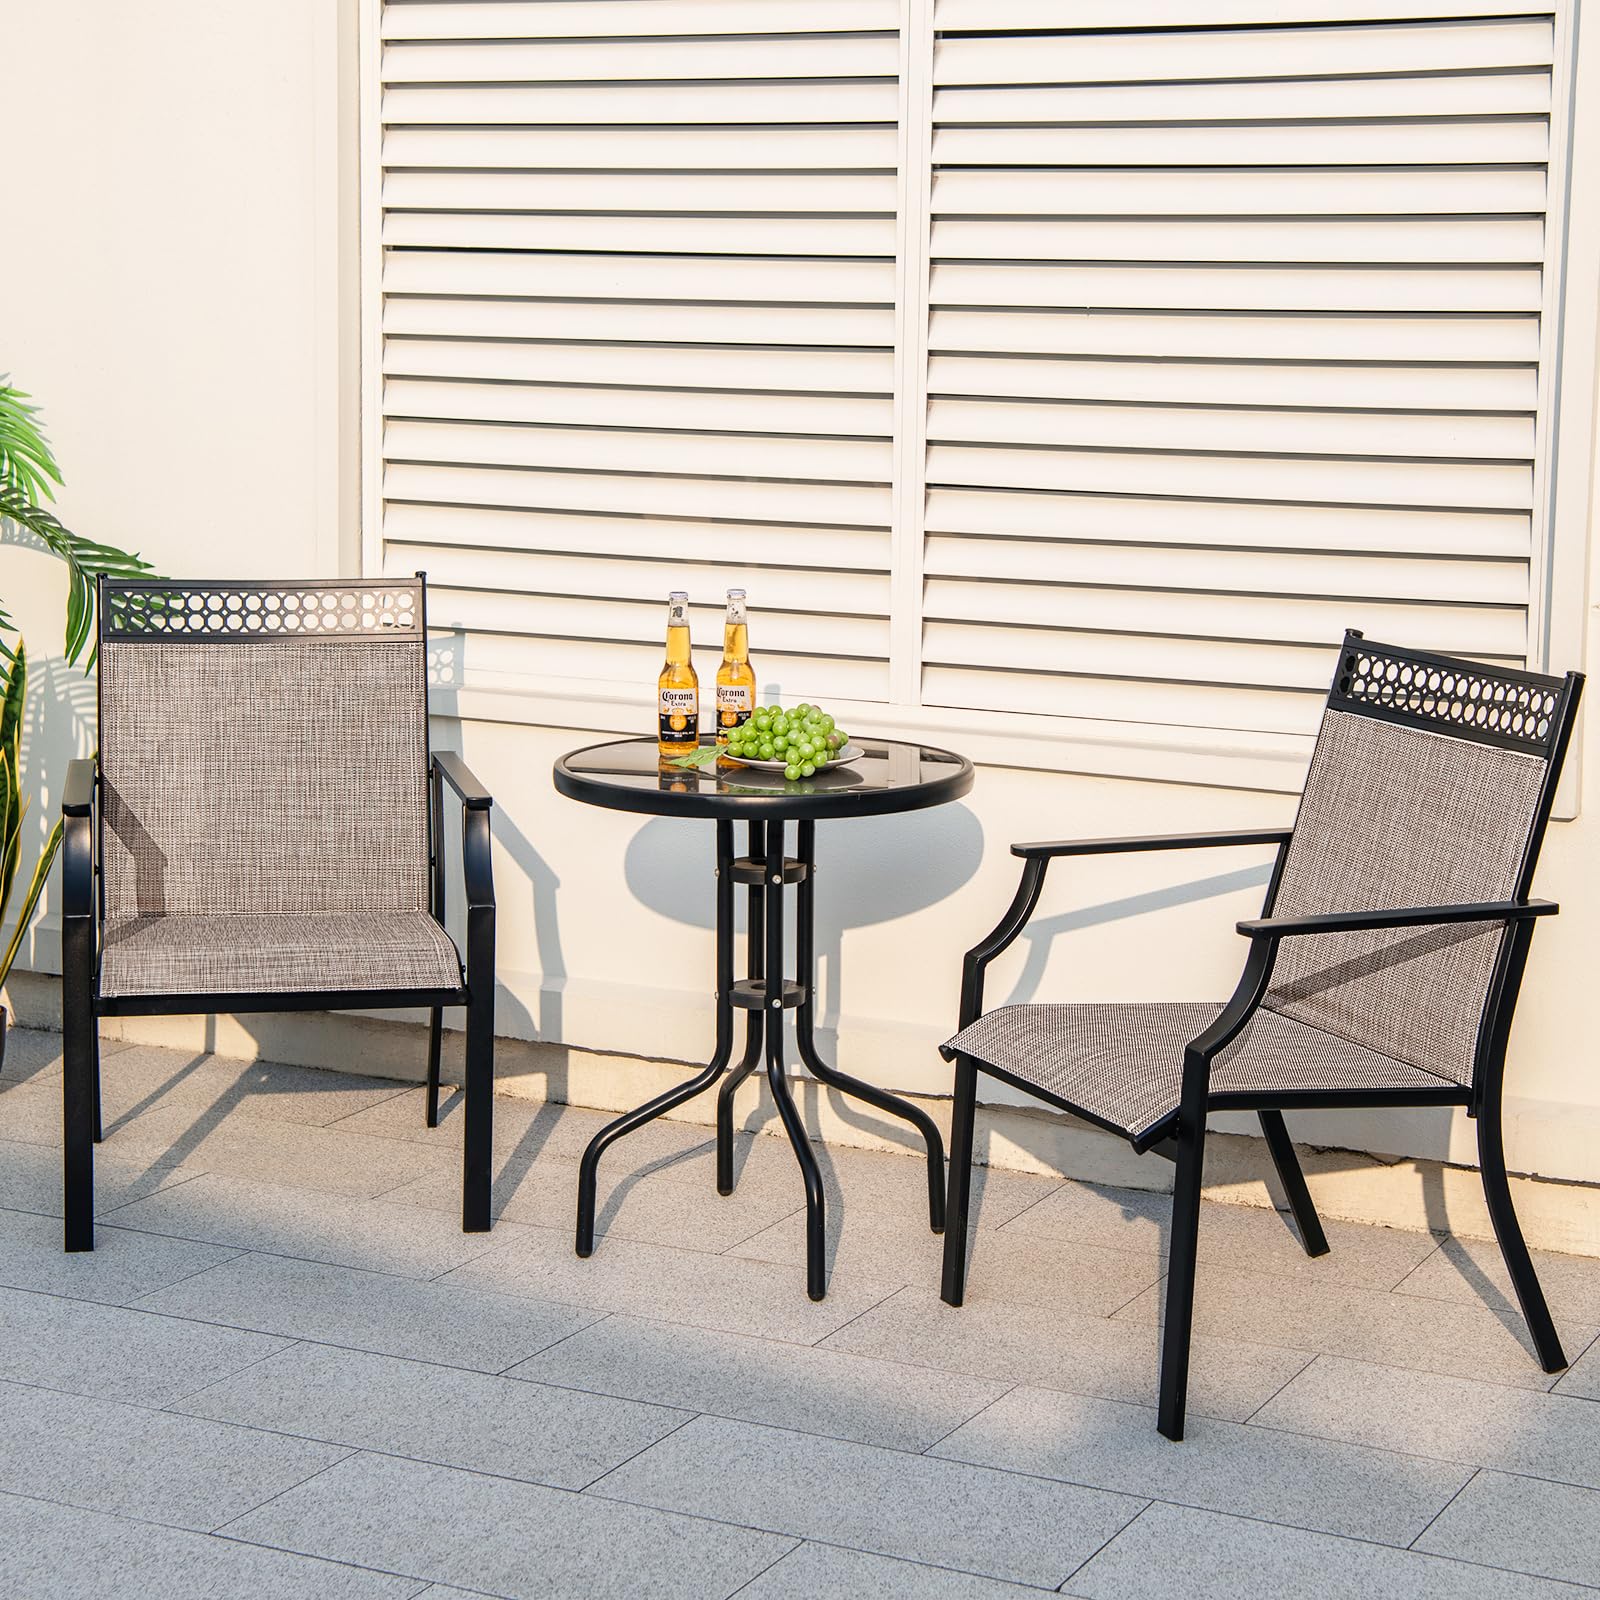 Giantex Patio Chairs Set of 2/4, Outdoor Chairs with All Weather Fabric, High Backrest, Armrests